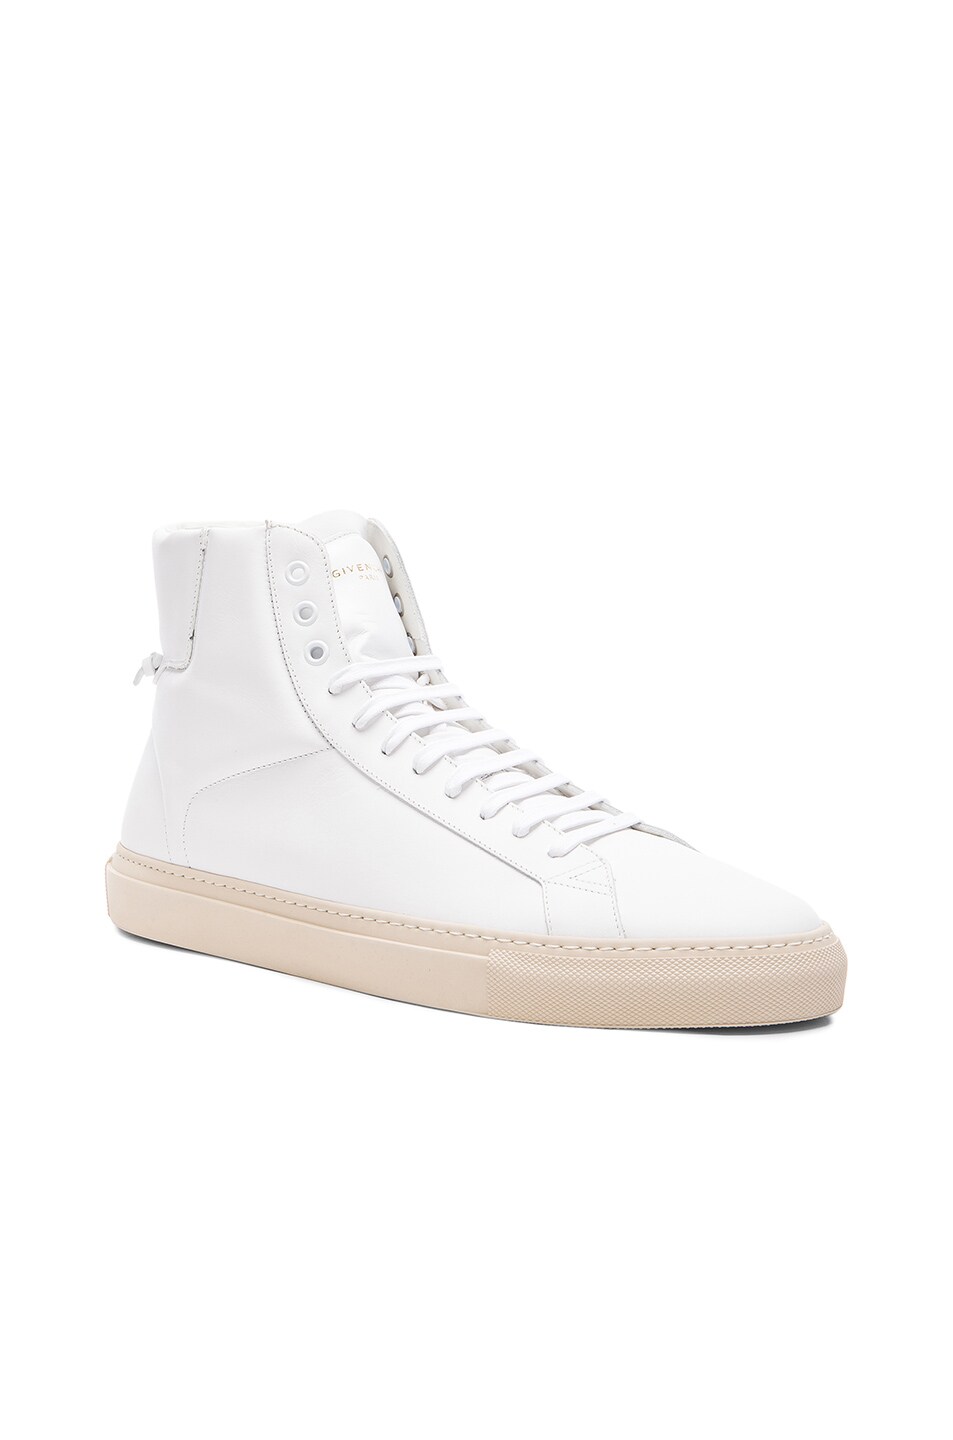 Image 1 of Givenchy Knots High Top Leather Sneakers in White